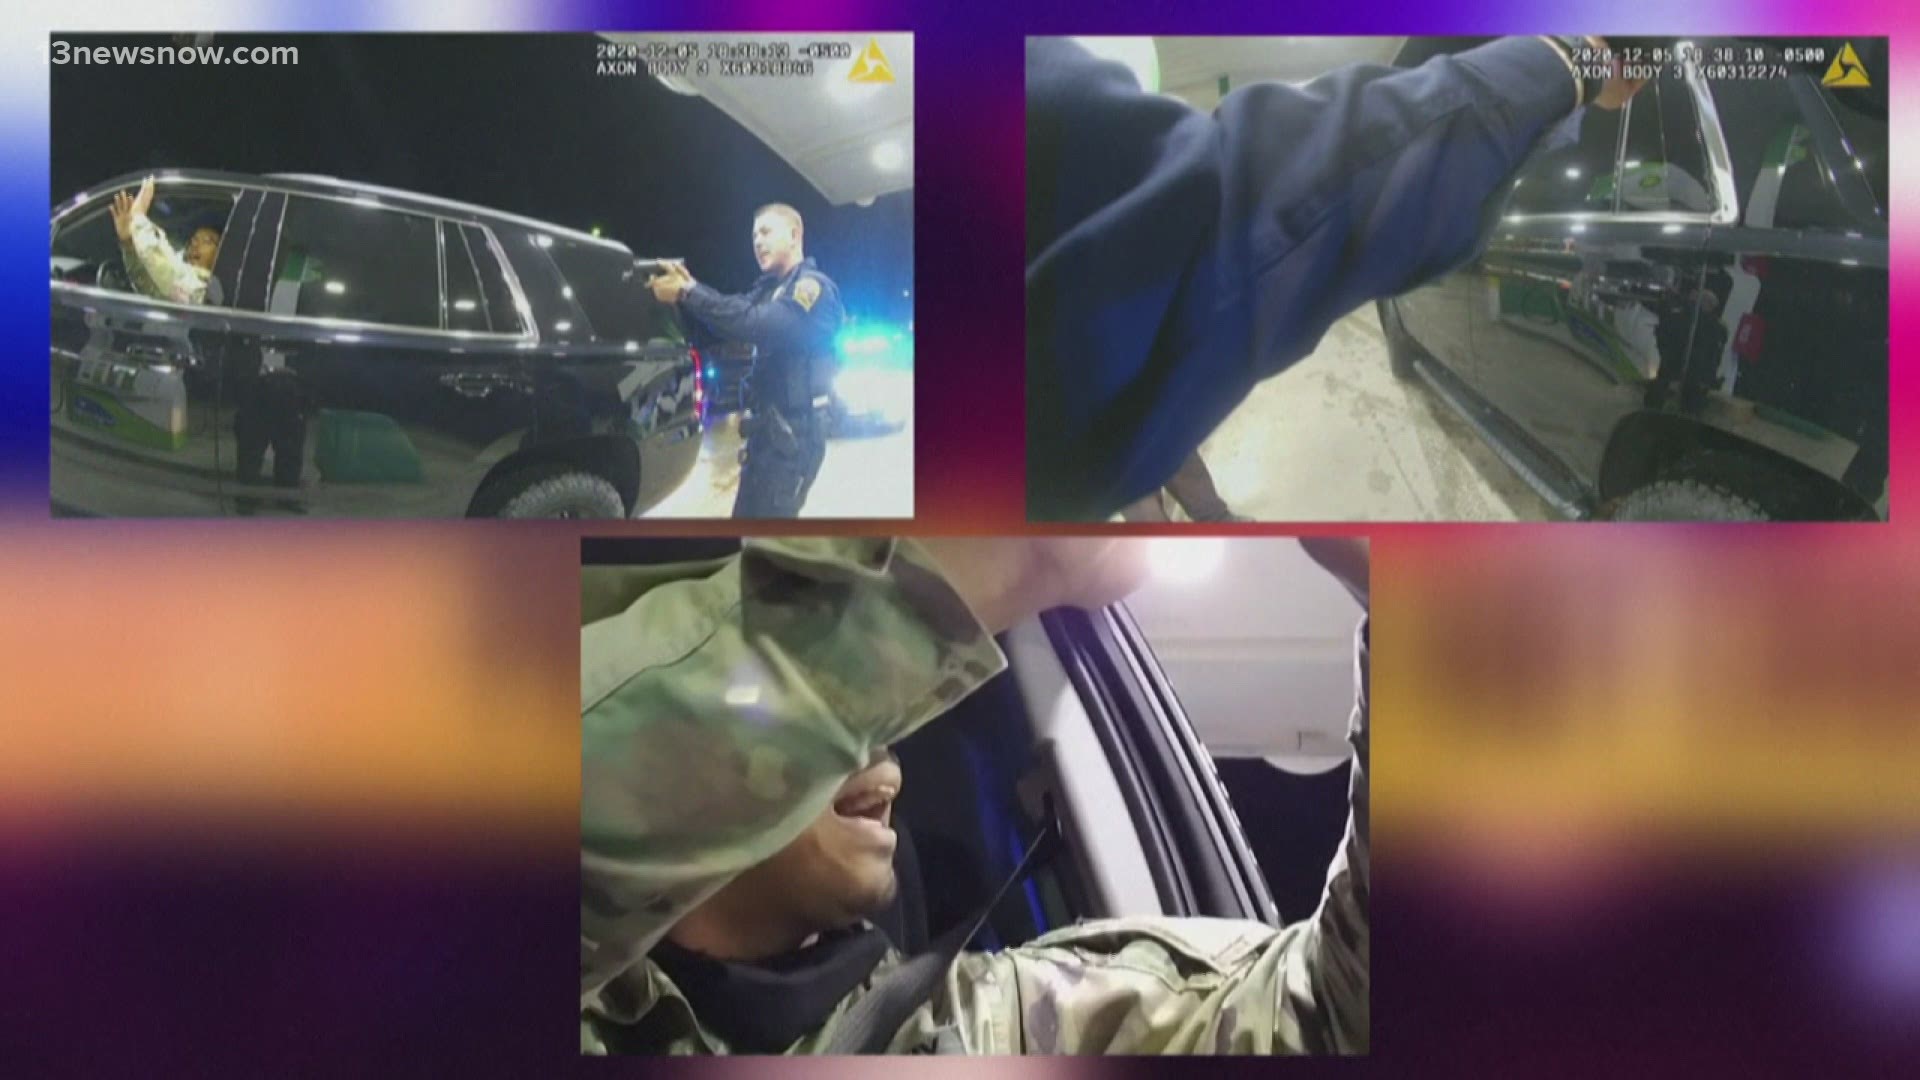 The traffic stop happened on December 5, 2020, when former police officer Joe Gutierrez pepper-sprayed Lt. Caron Nazario, whose hands were up out of his car window.